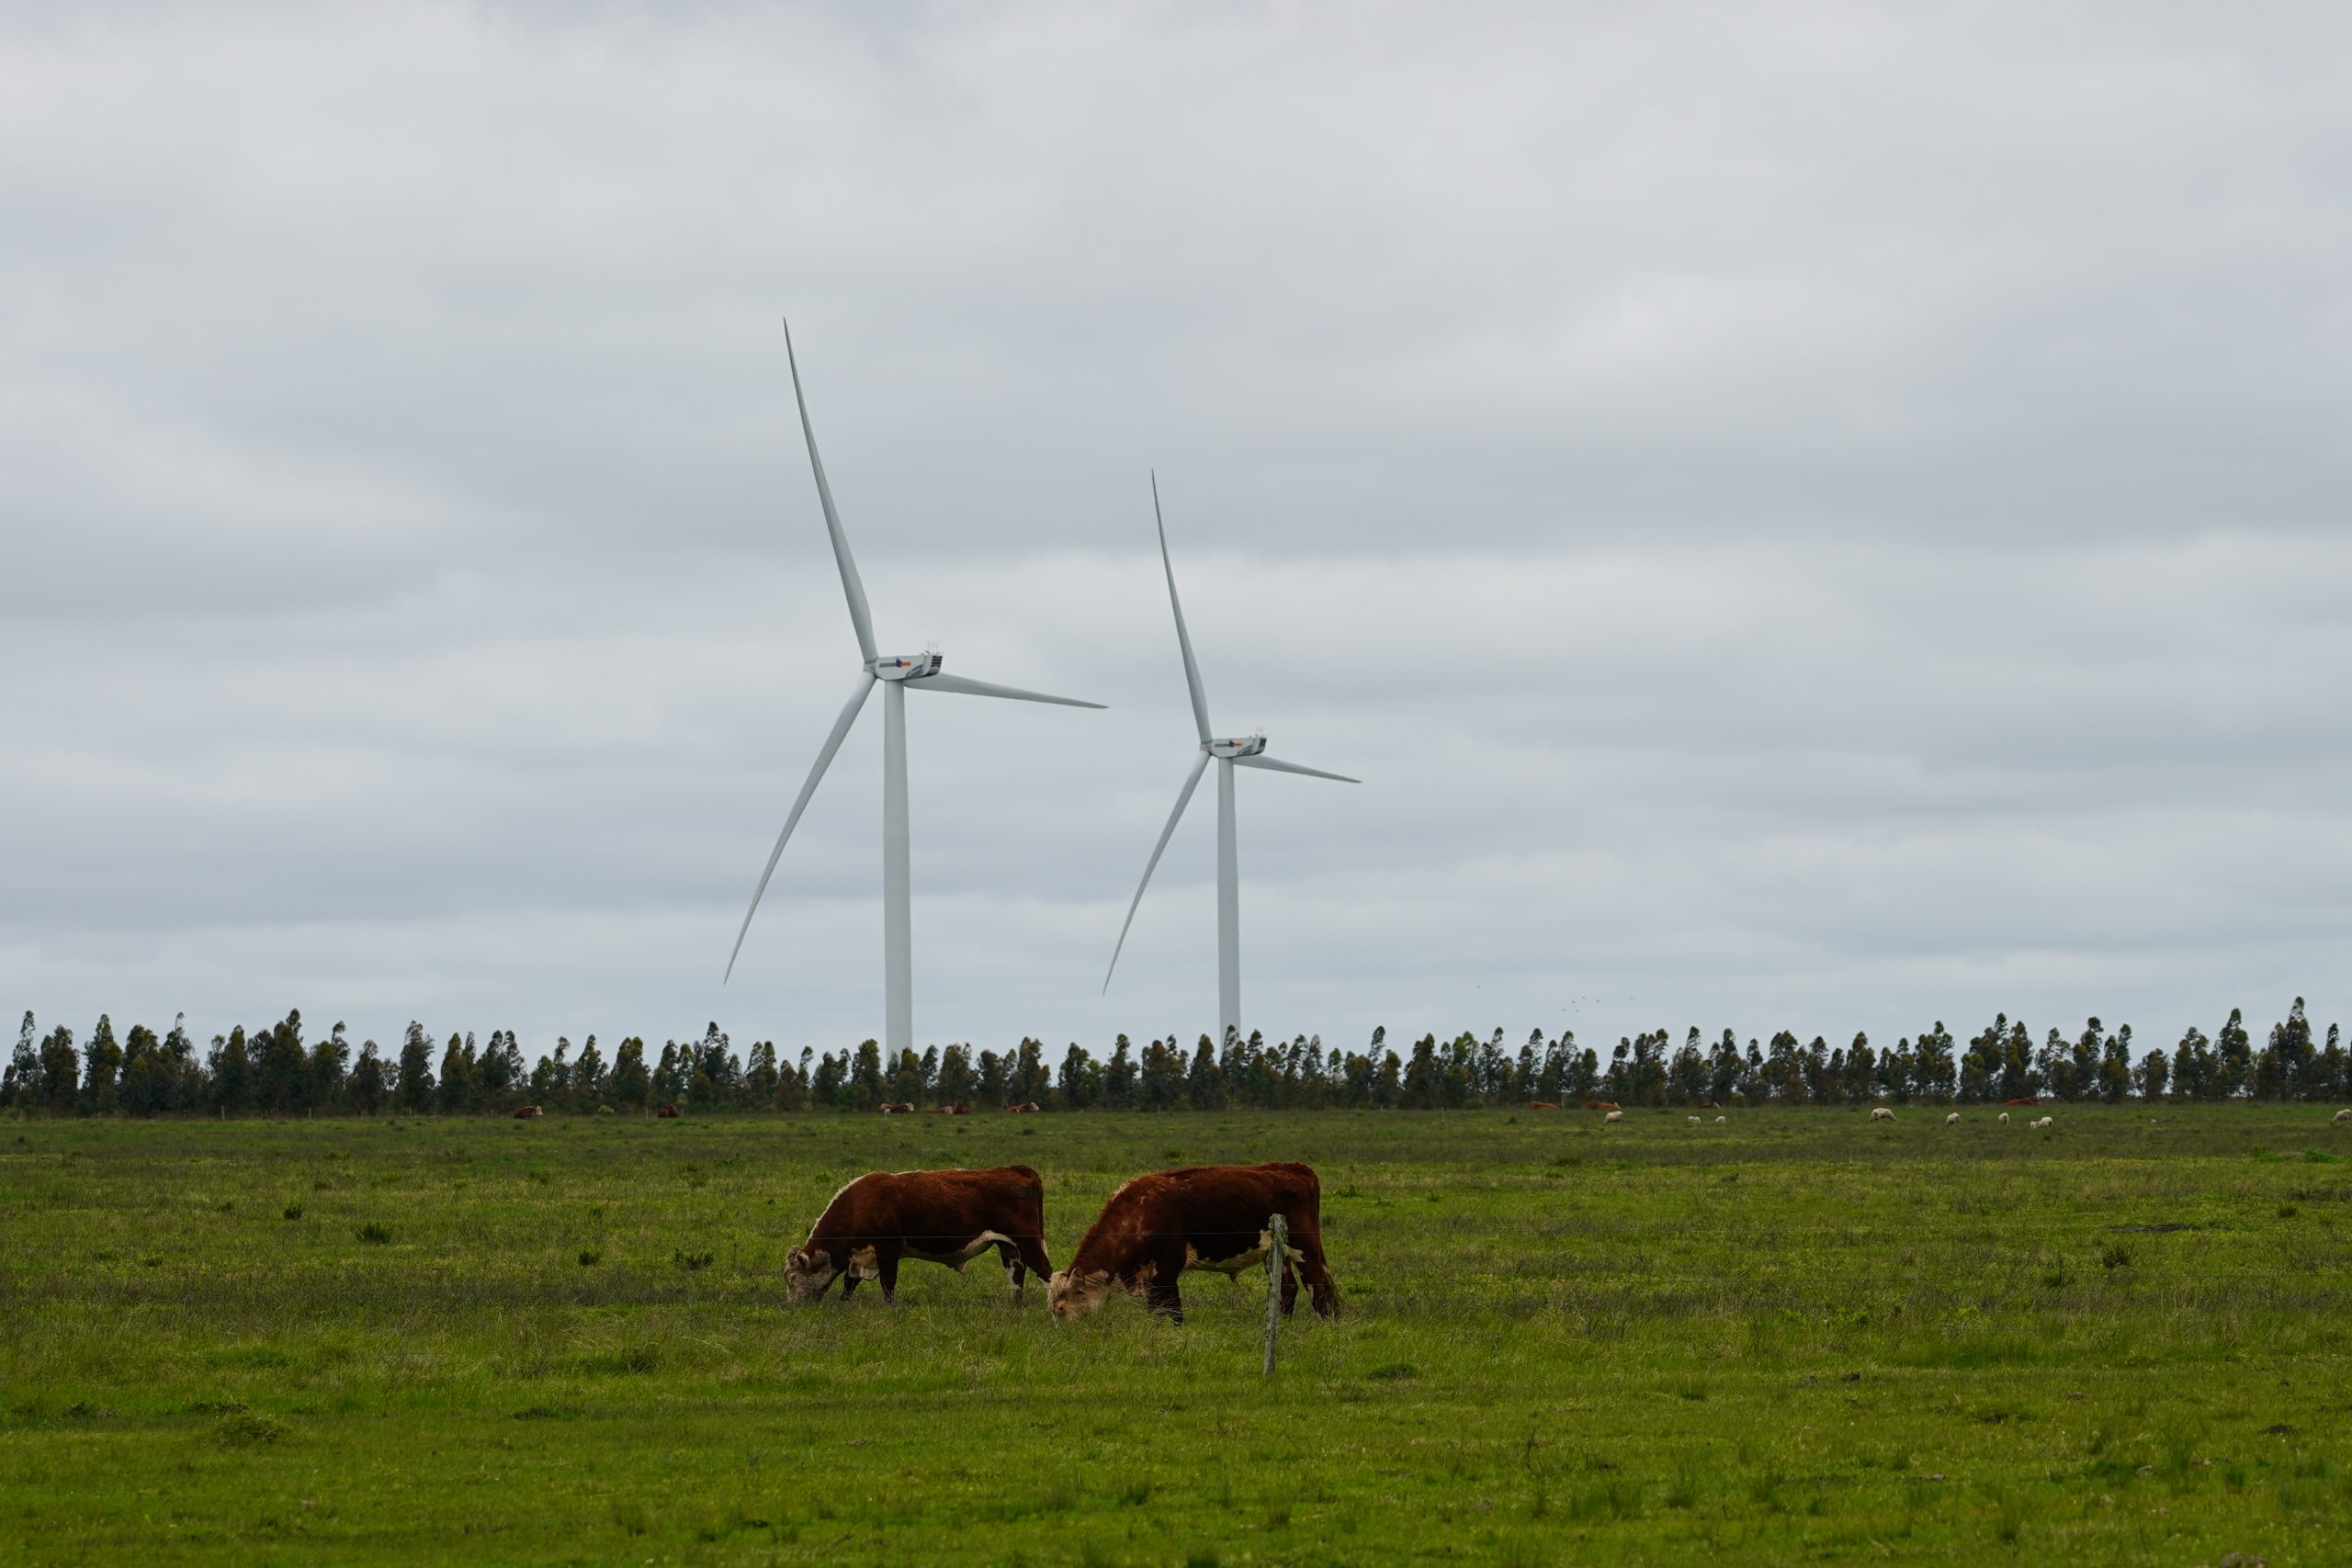 cows grazing and two windmills in the background